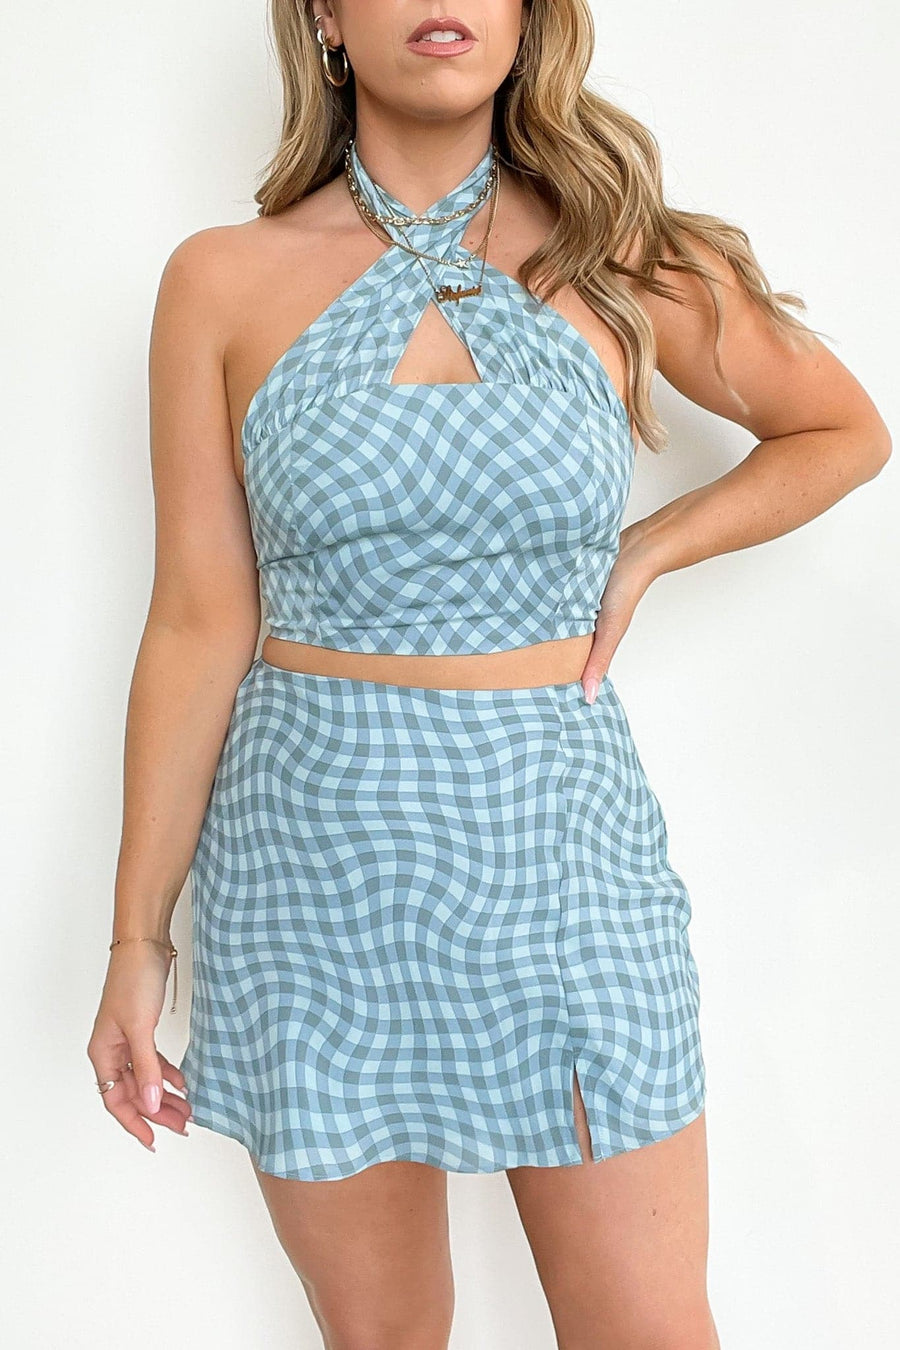 S / Teal/Blue Point for Me Check Print Skirt - FINAL SALE - kitchencabinetmagic